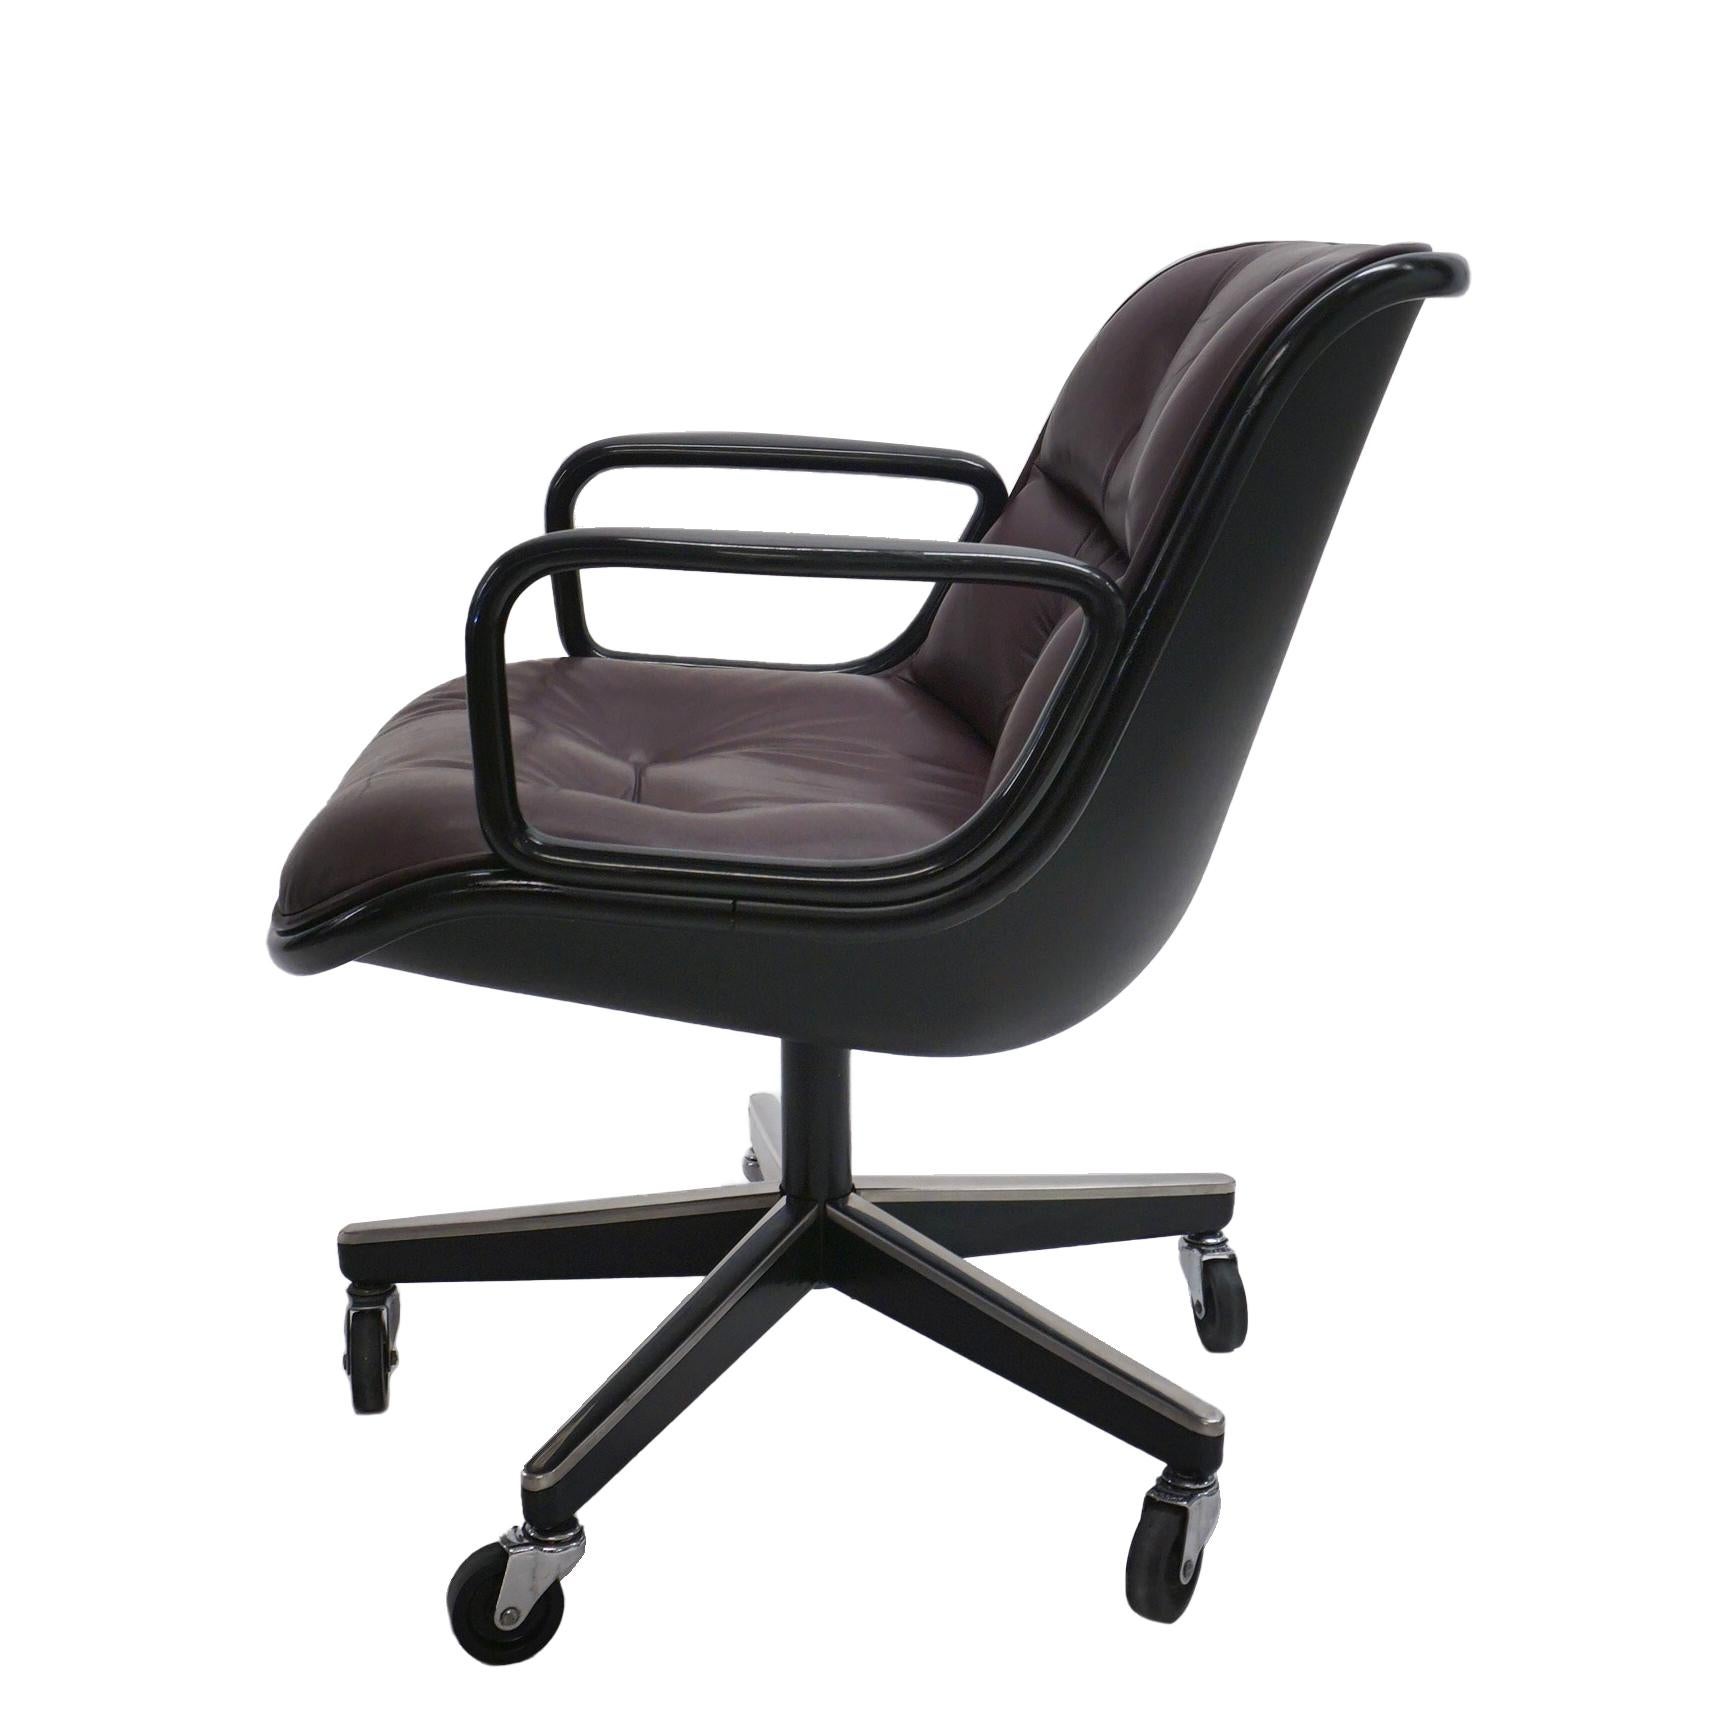 Mid-Century Modern Knoll Pollock Executive Chair in Aubergine Leather, Matte Black Frame For Sale